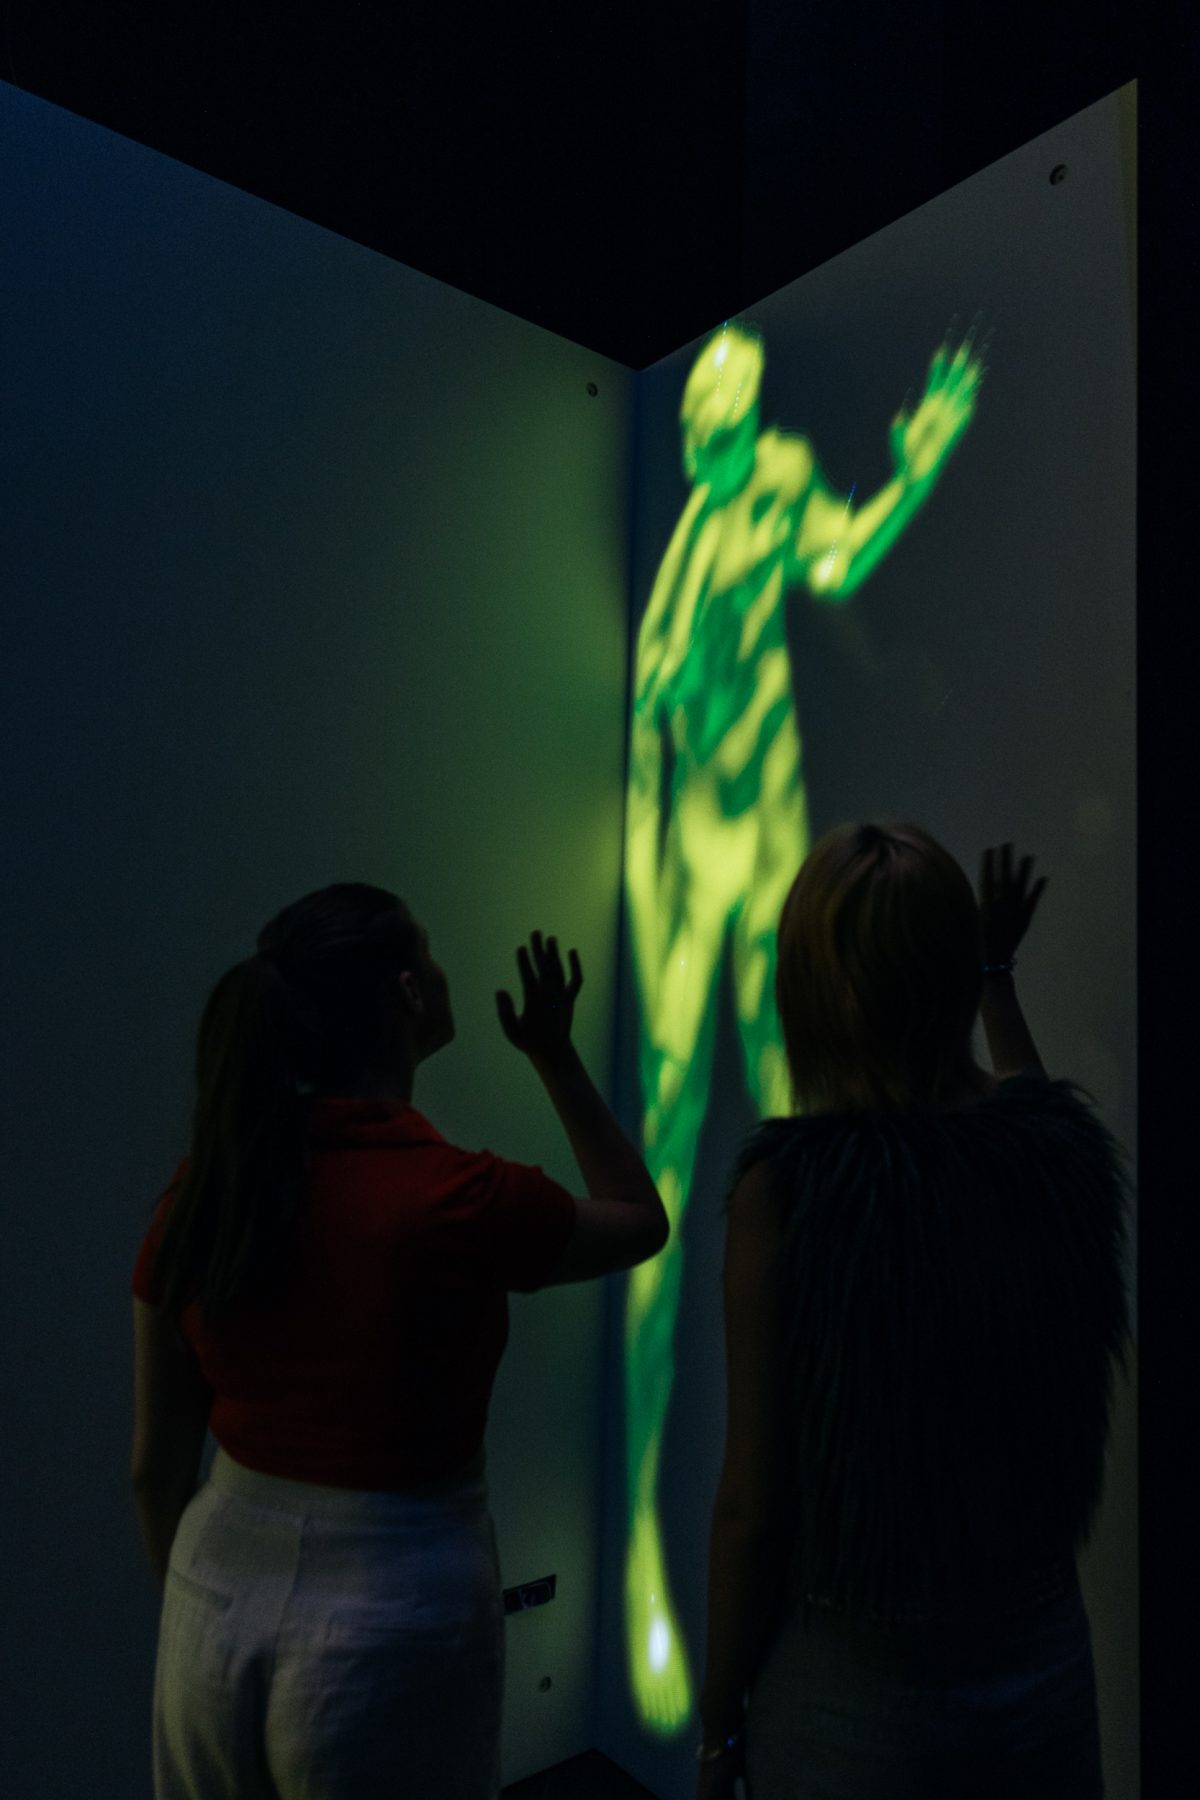 Visitor interacting with projected version of themselves